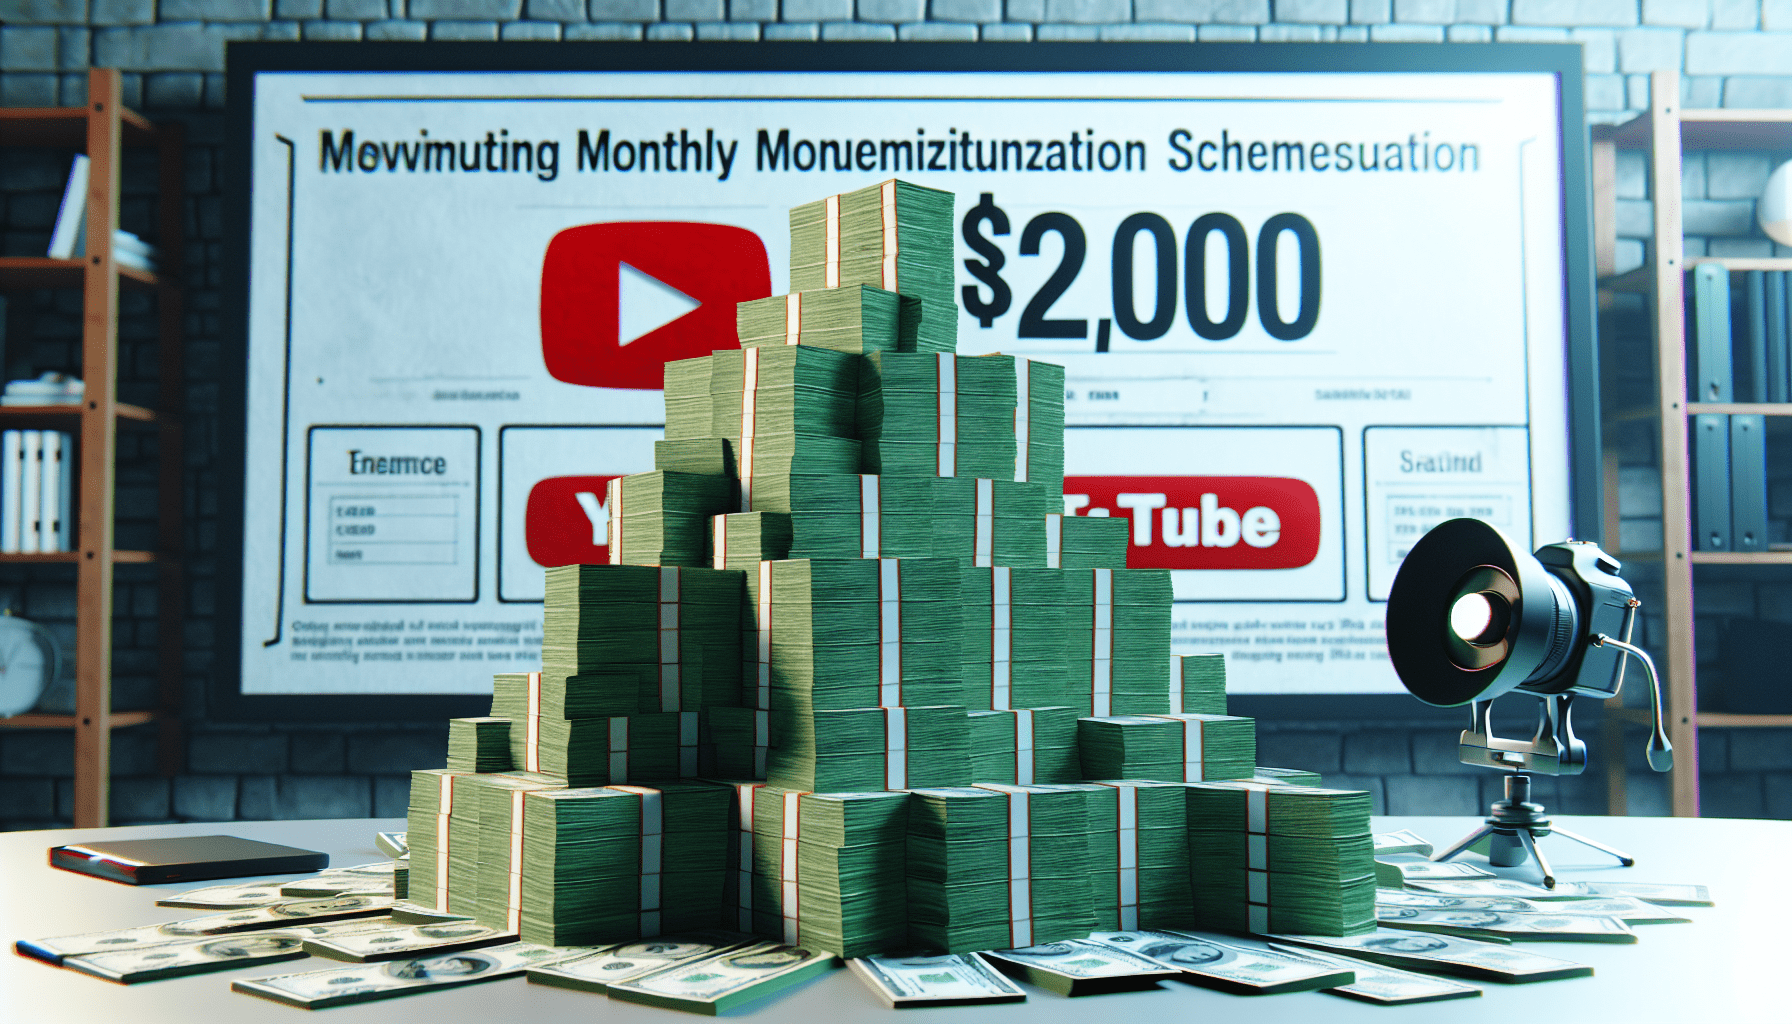 How Many Views On YouTube Do You Need To Make $2000 A Month?